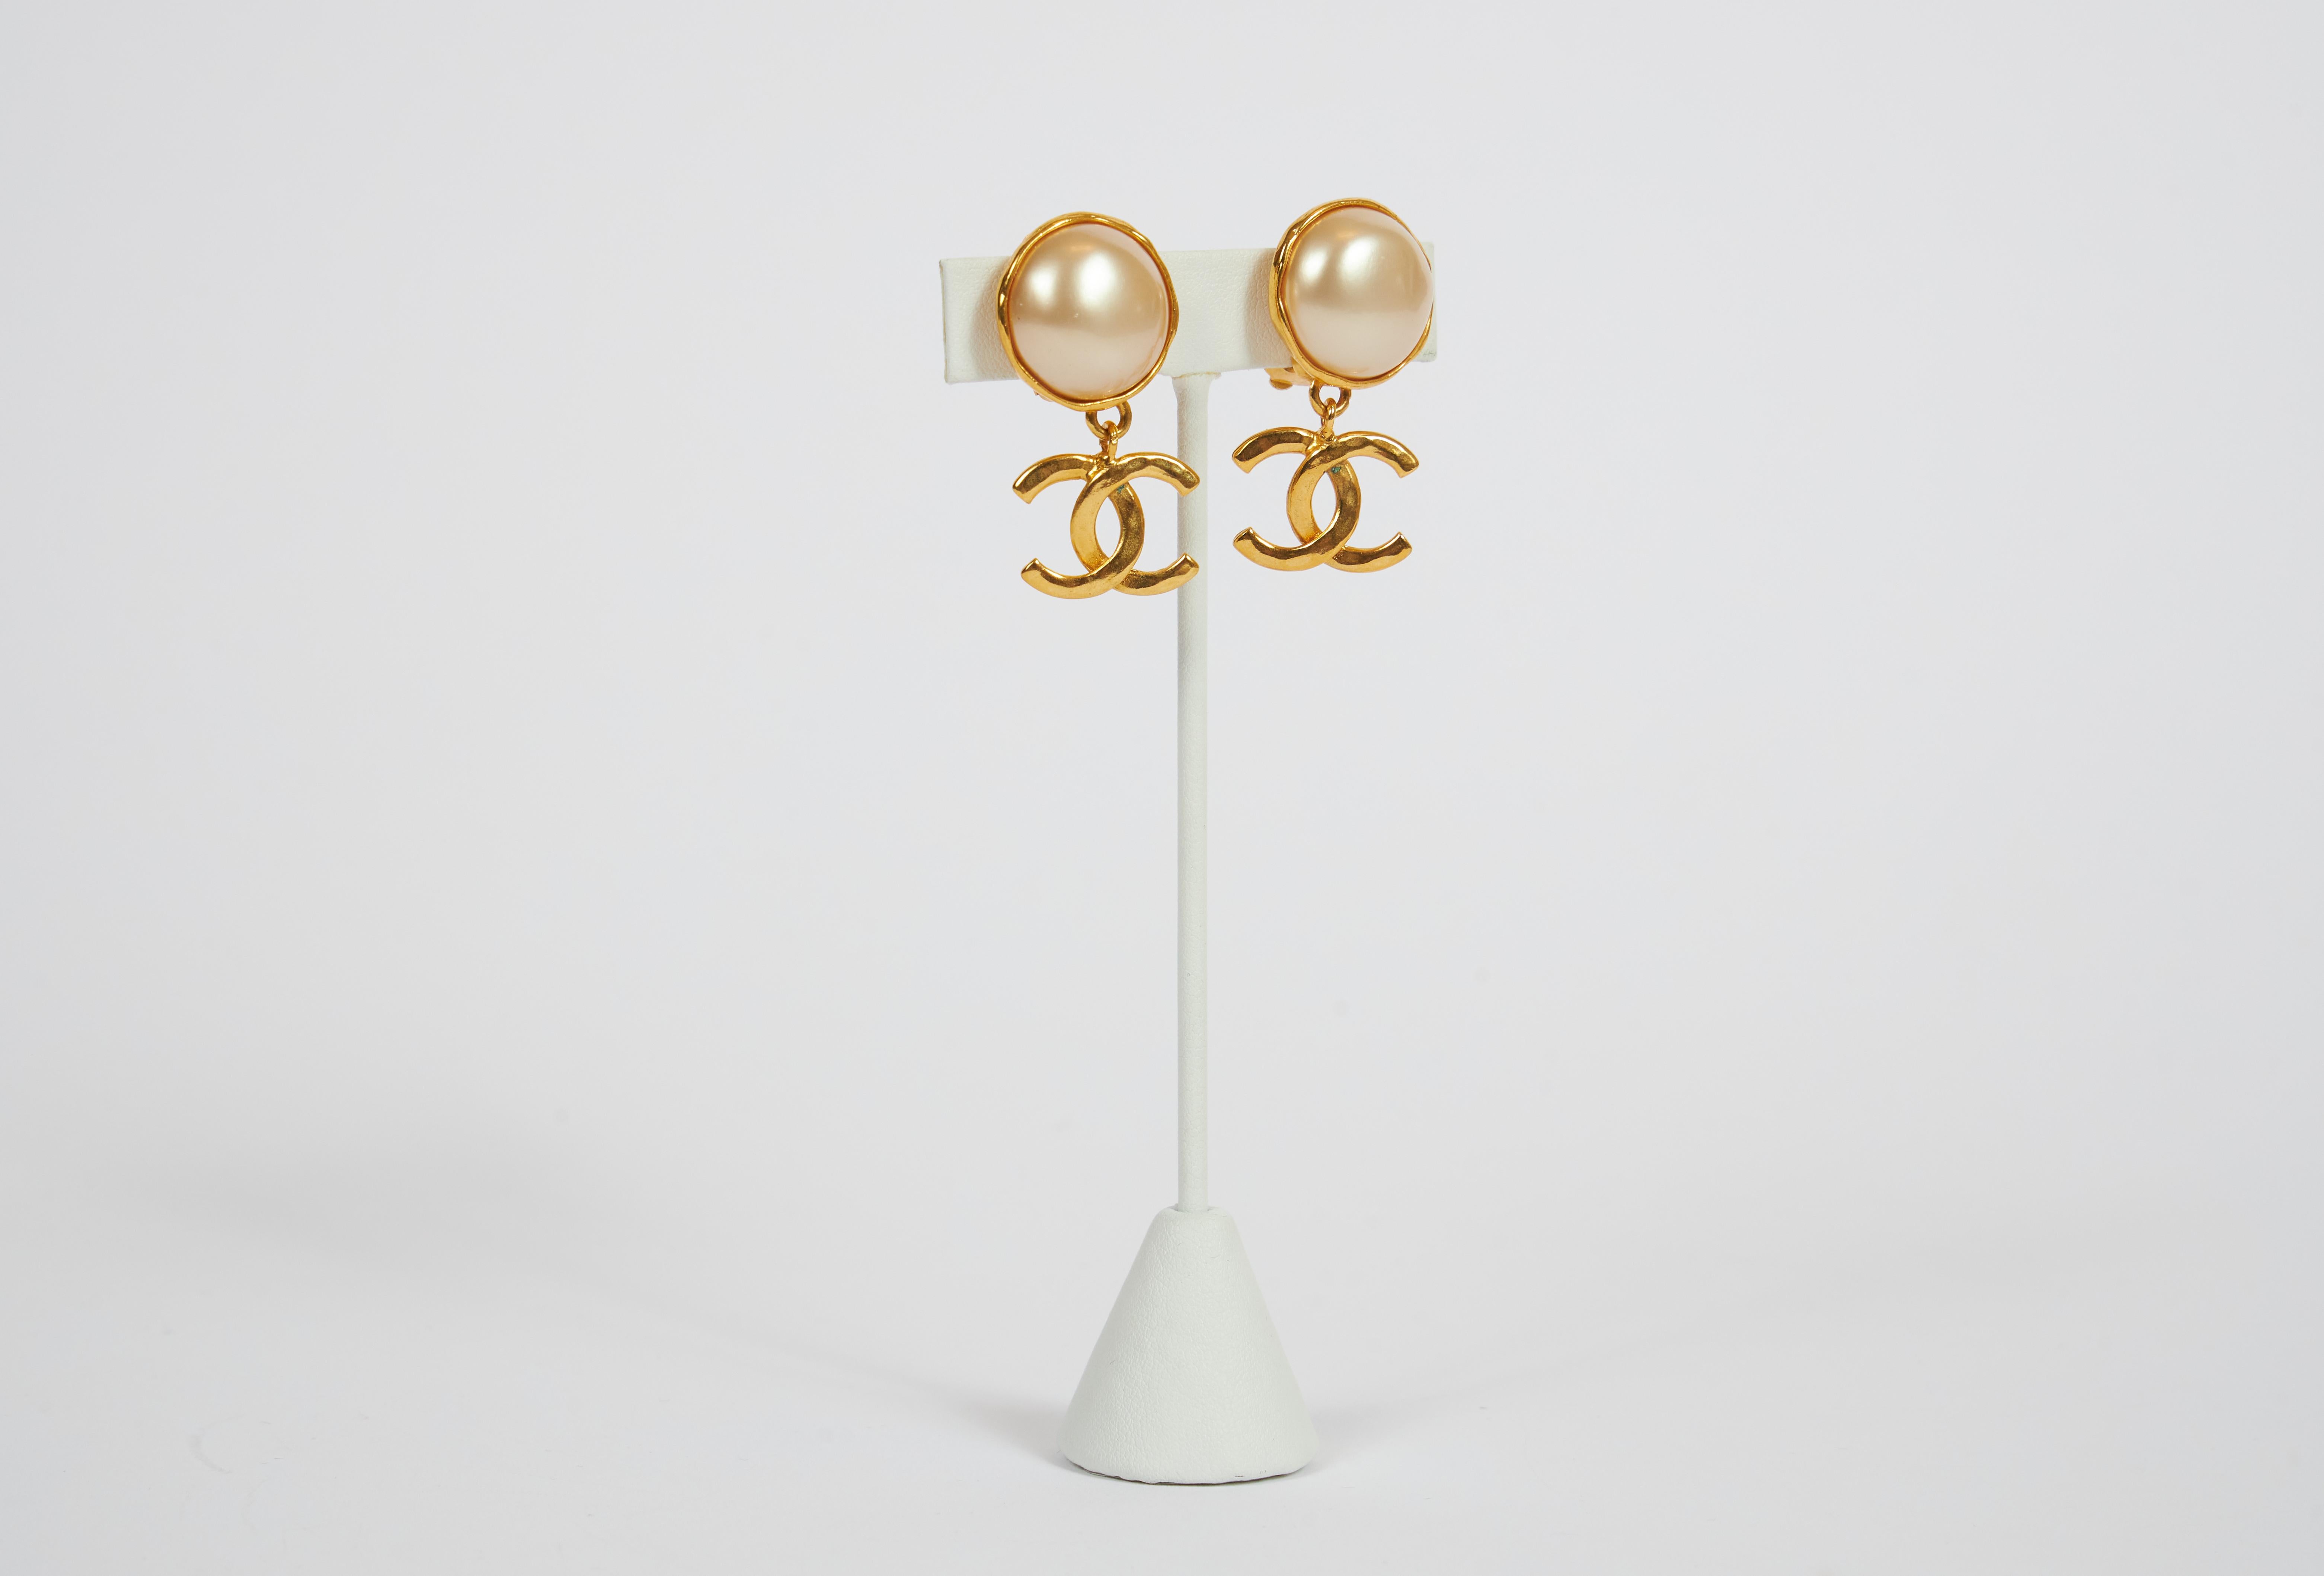 Chanel classy faux make pearl clip earrings with gold cc logo dangle. Early 80s collection. Come with original box.